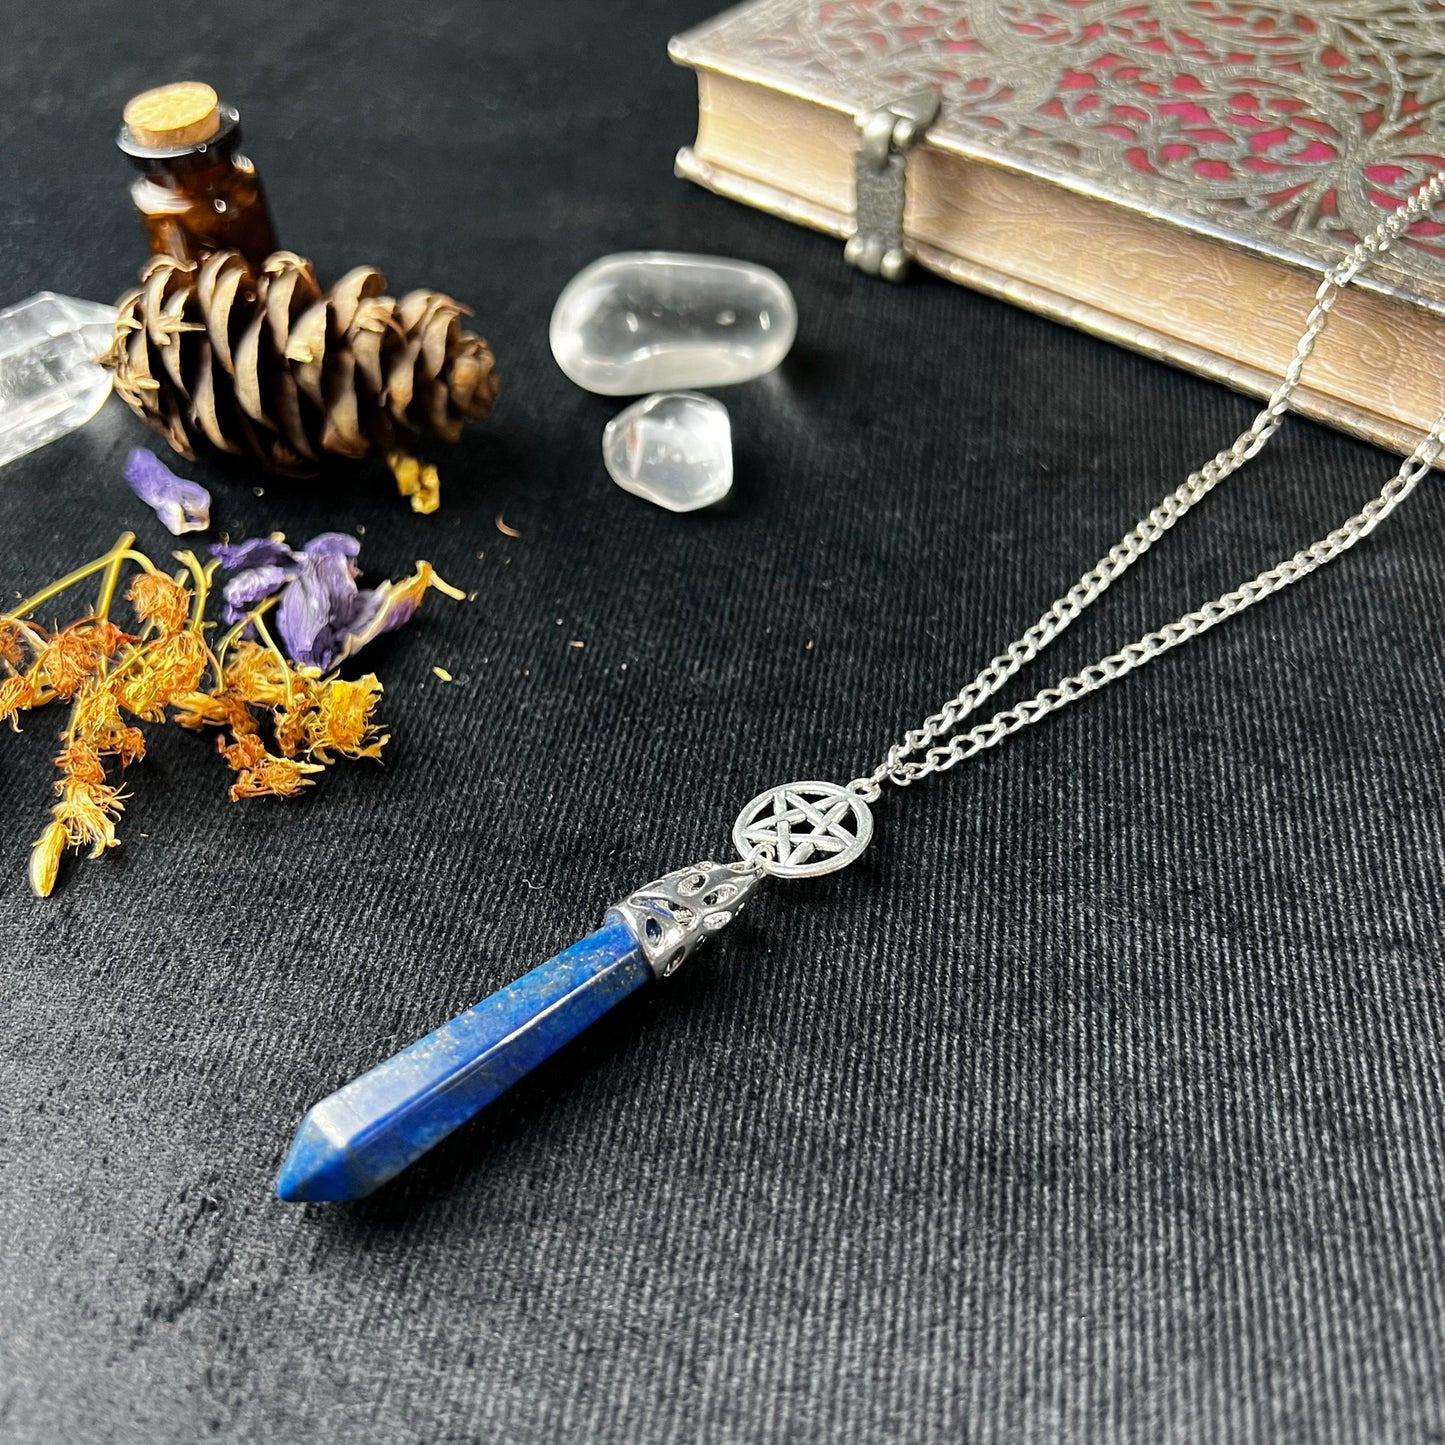 Lapis lazuli and pentacle pendulum necklace - The French Witch shop